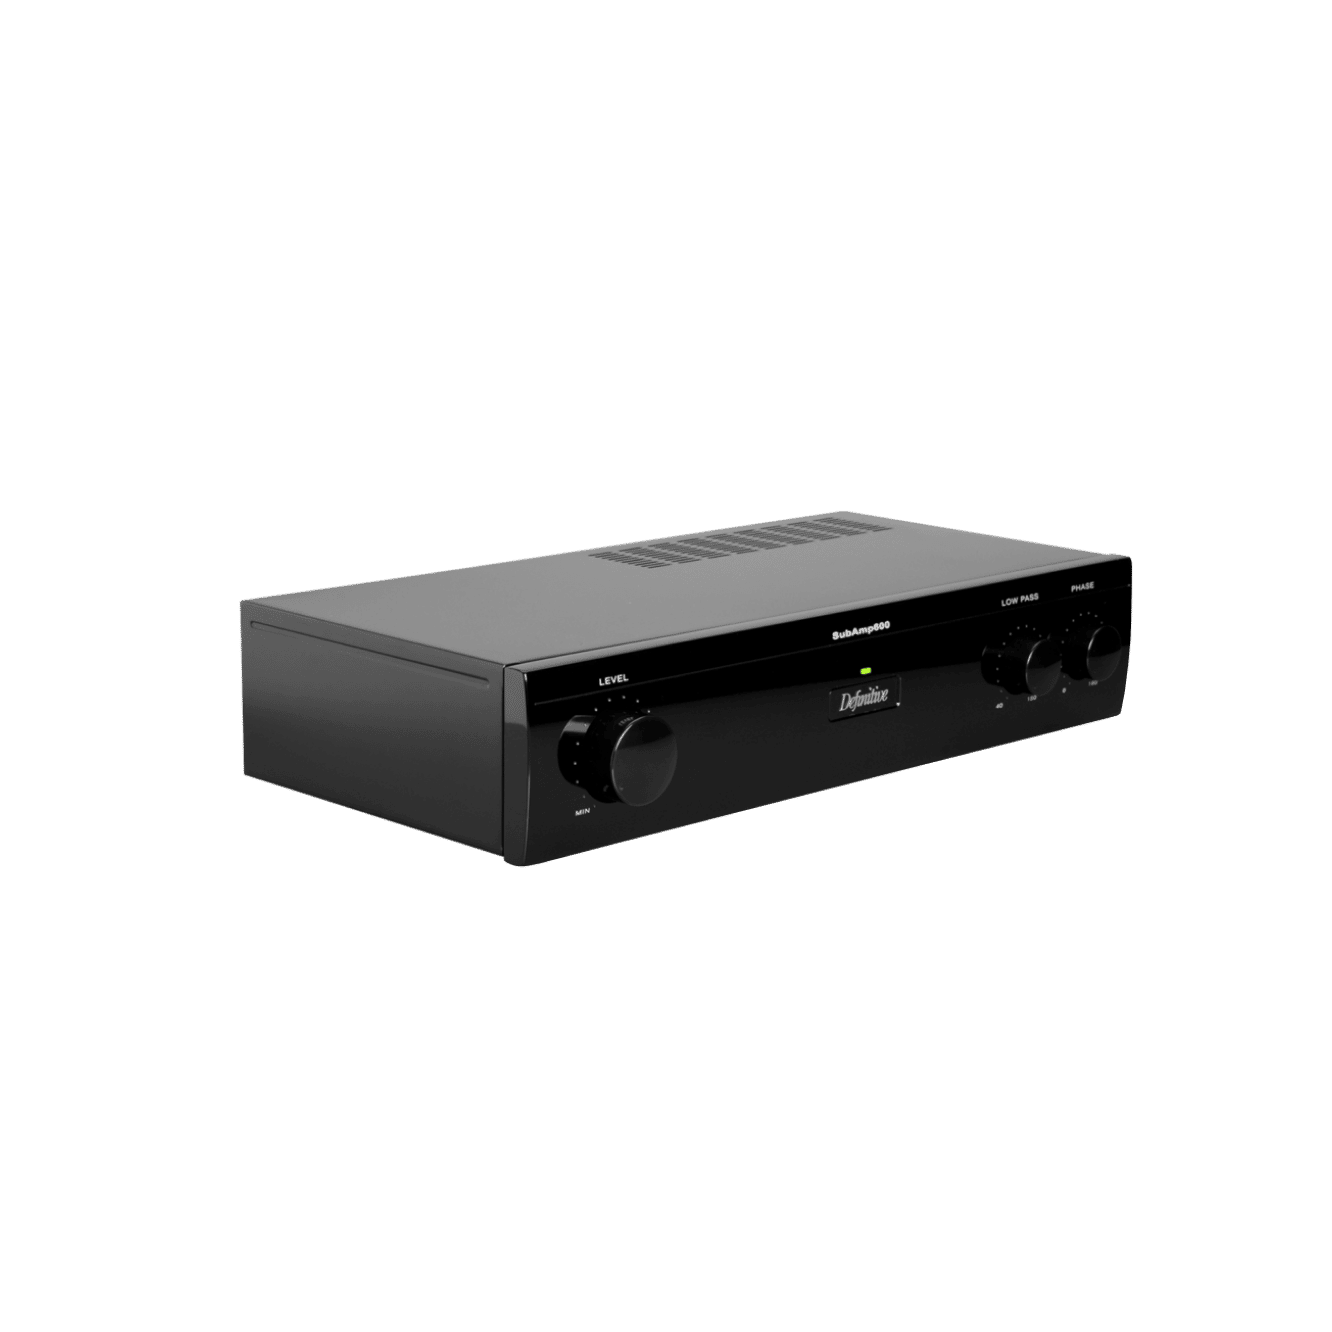 Definitive Technology IW SUBAMP 600 Reference In-Wall High-Power Amplifier for use with IWSubs -Brackets included